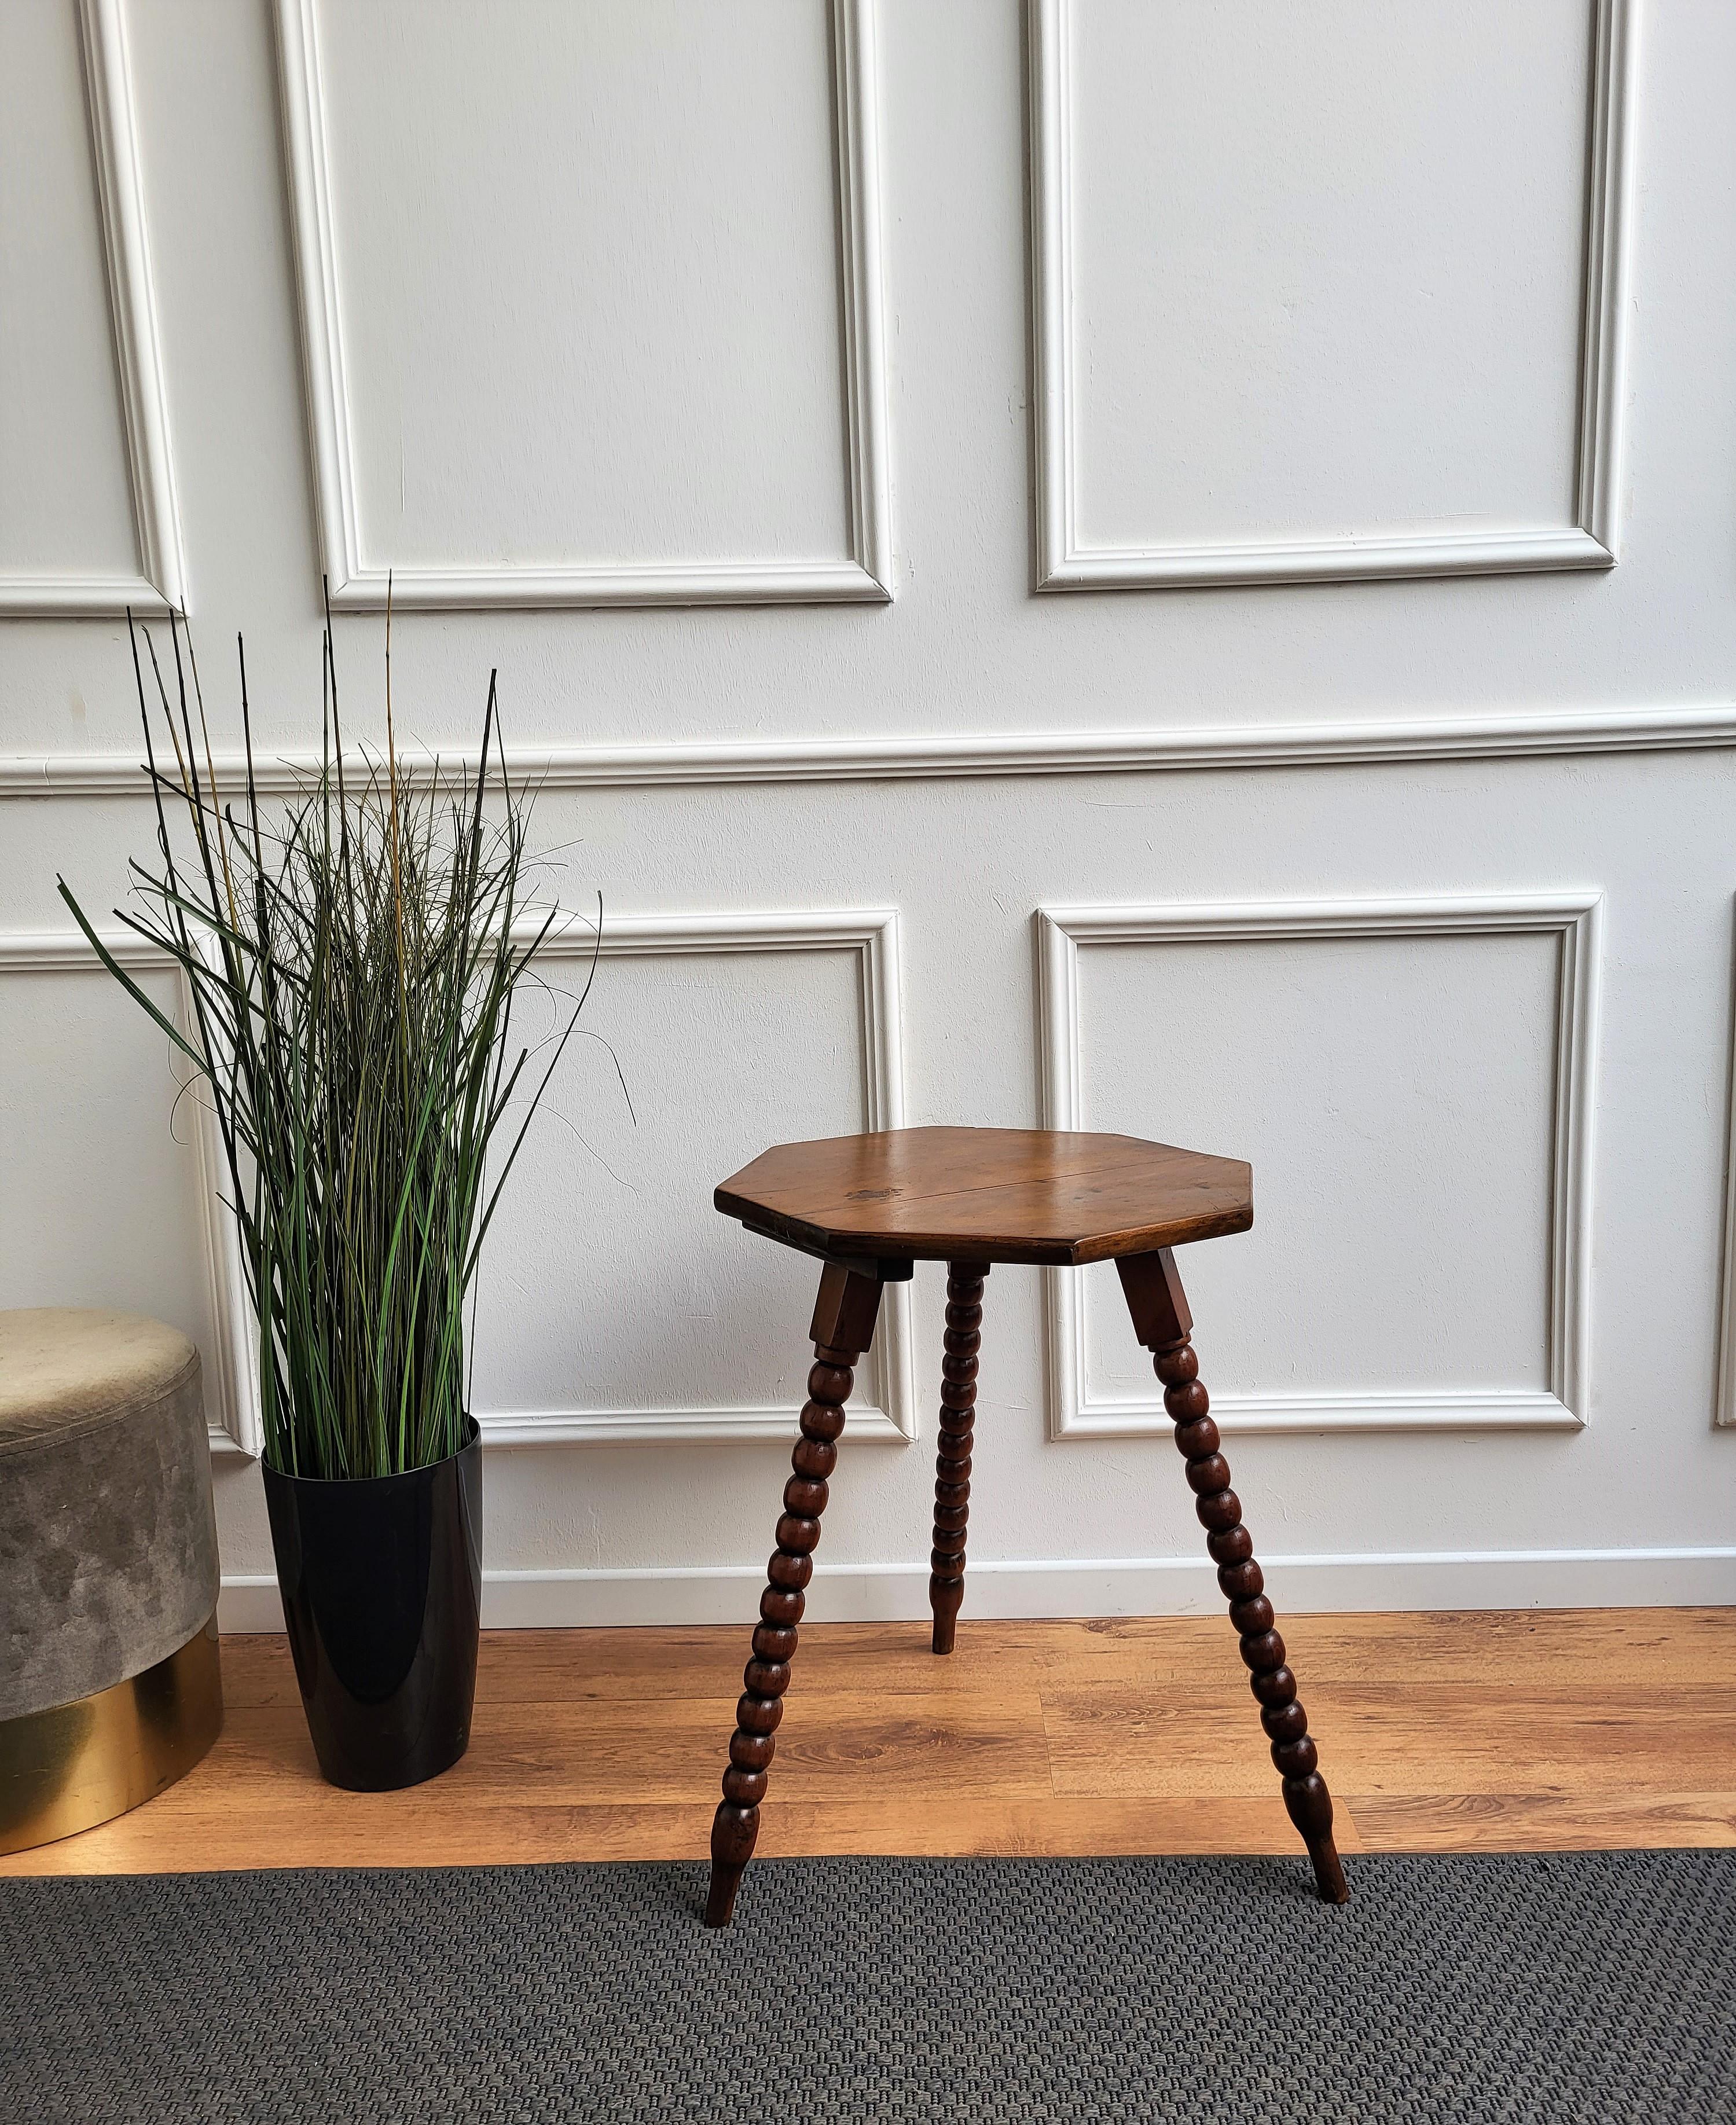 Beautiful antique wooden Italian walnut side table or occasional table with octagonal top raised on three beautifully bobbin turned legs. This Italian walnut side table with the rich and beautiful patina would look wonderful in a corner coupled with